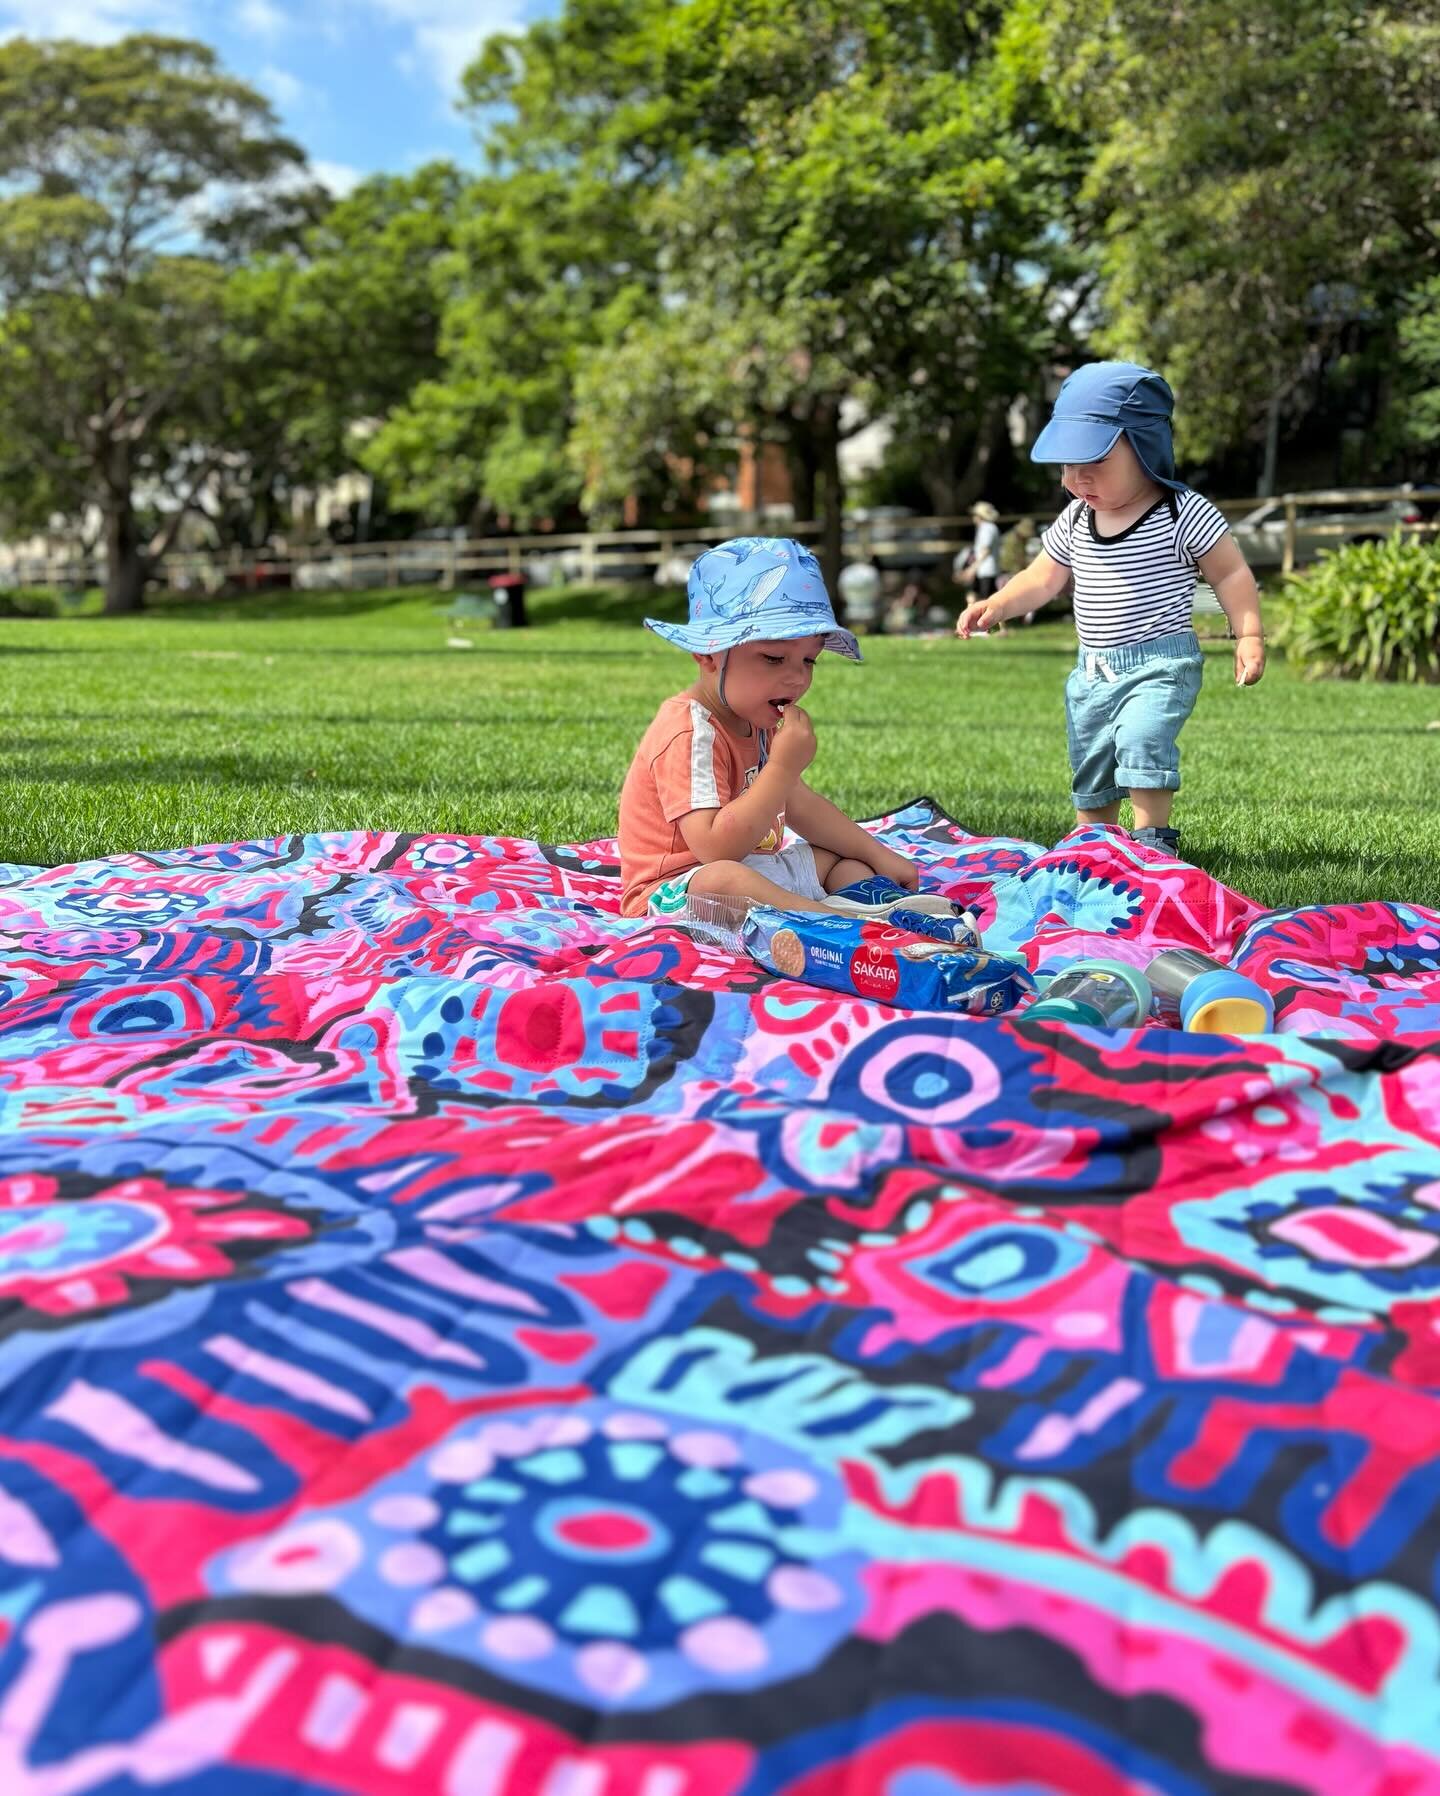 Featuring artwork &lsquo;Mpampaintji Pintjamu (Morning Light)&rsquo; by @arkiethelabel, we&rsquo;ve brought out this well loved retired mat design for a lovely island of pink and blue during snack time 🩷🩵 

Sister design to our &lsquo;Manamana (Sky